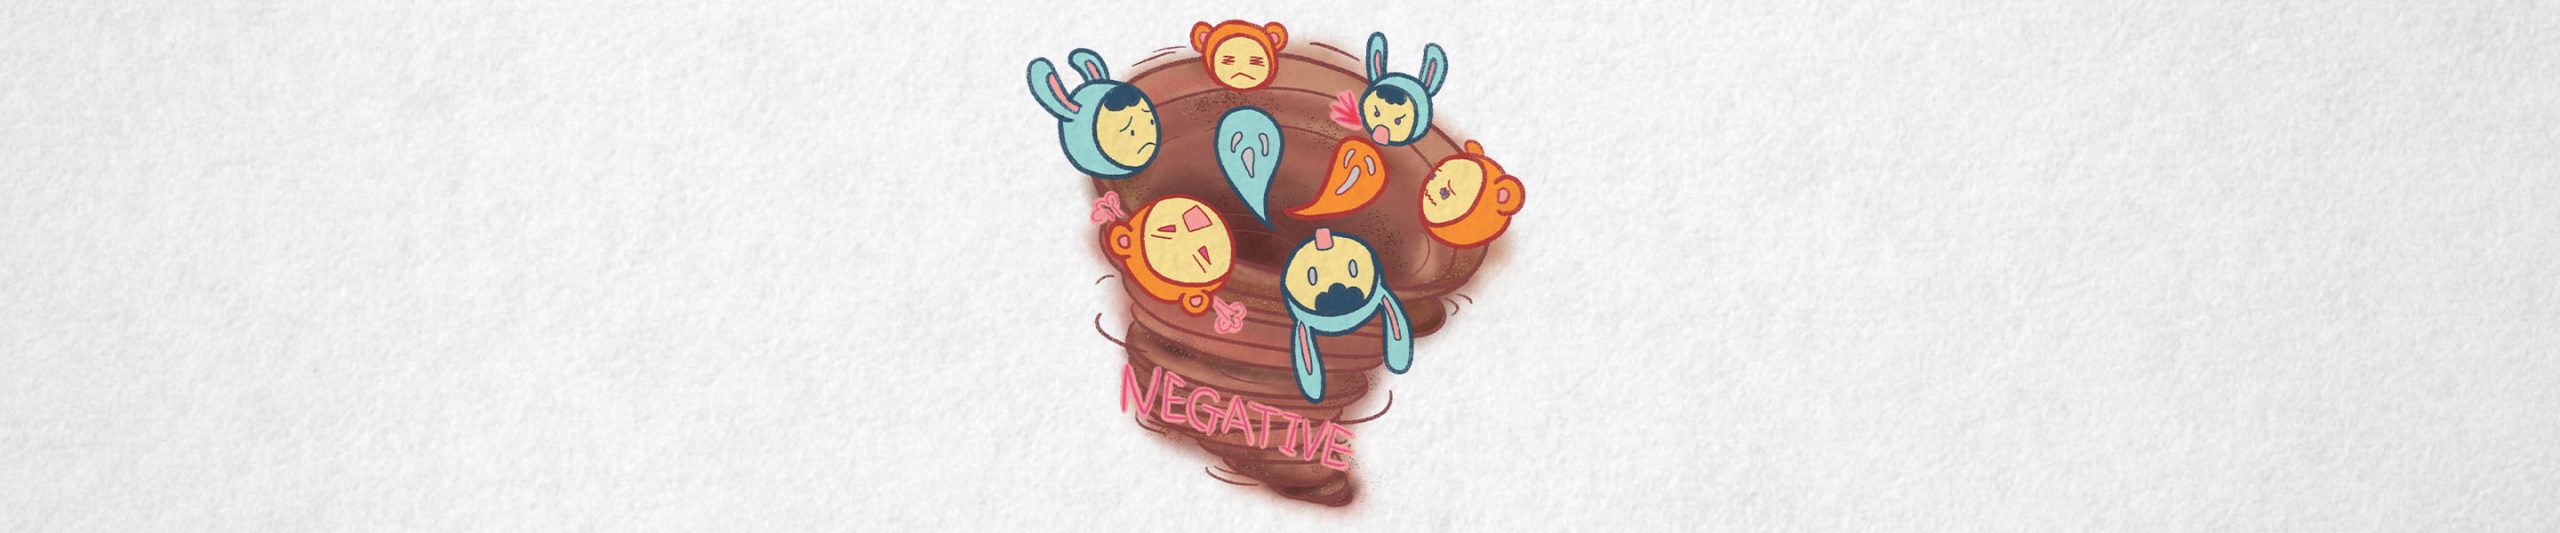 vs Negative Thought Loops